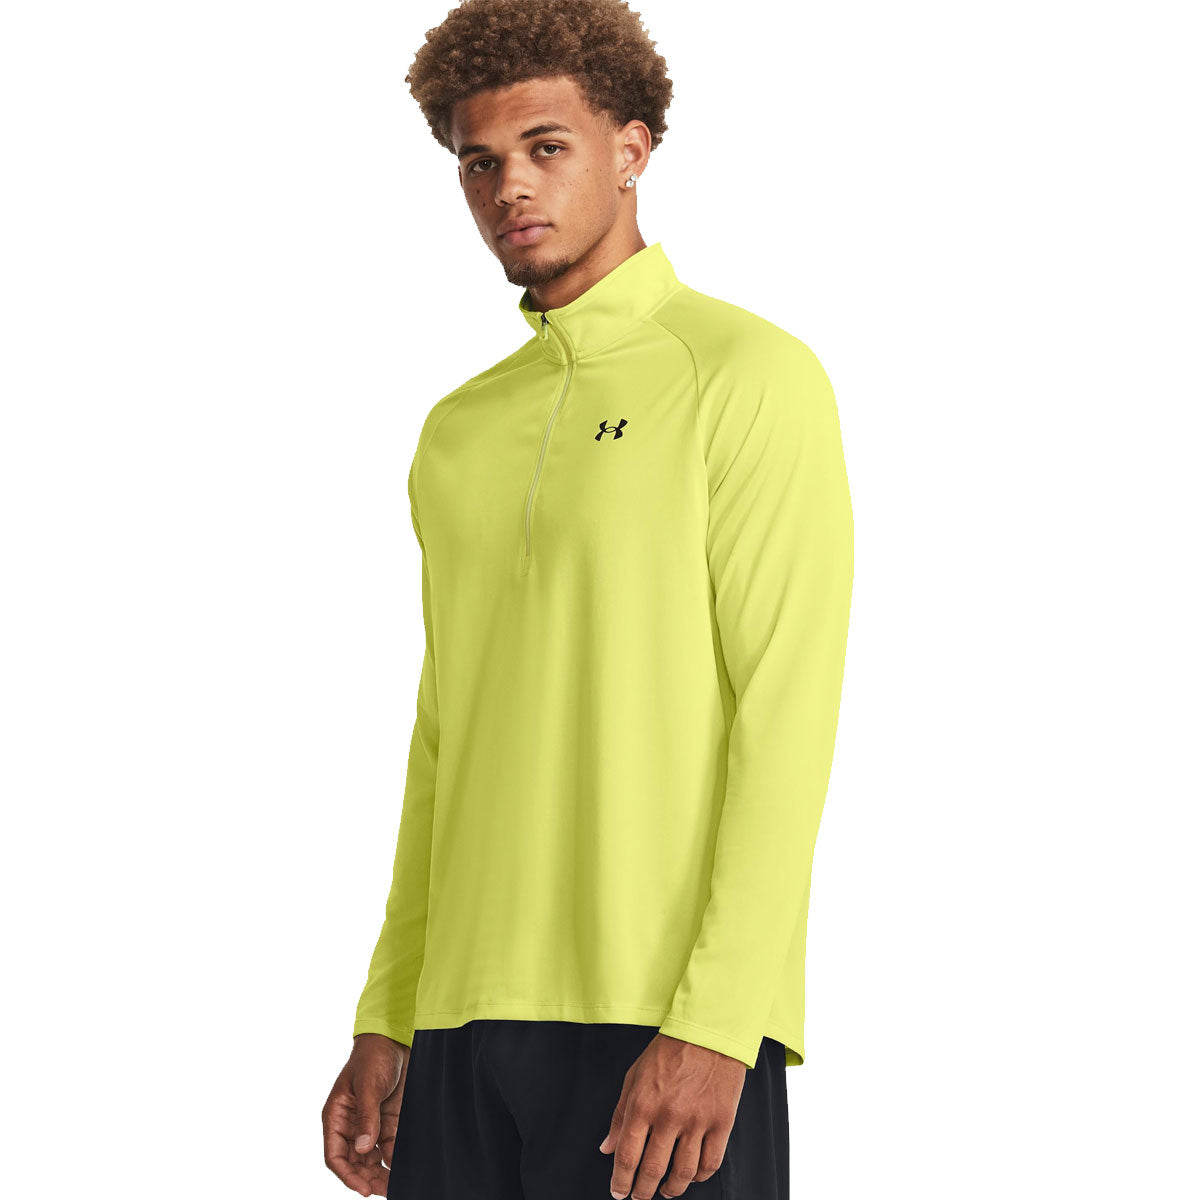 Under Armour Tech 1/2 Zip Training Top - Mens - Lime Yellow/Black